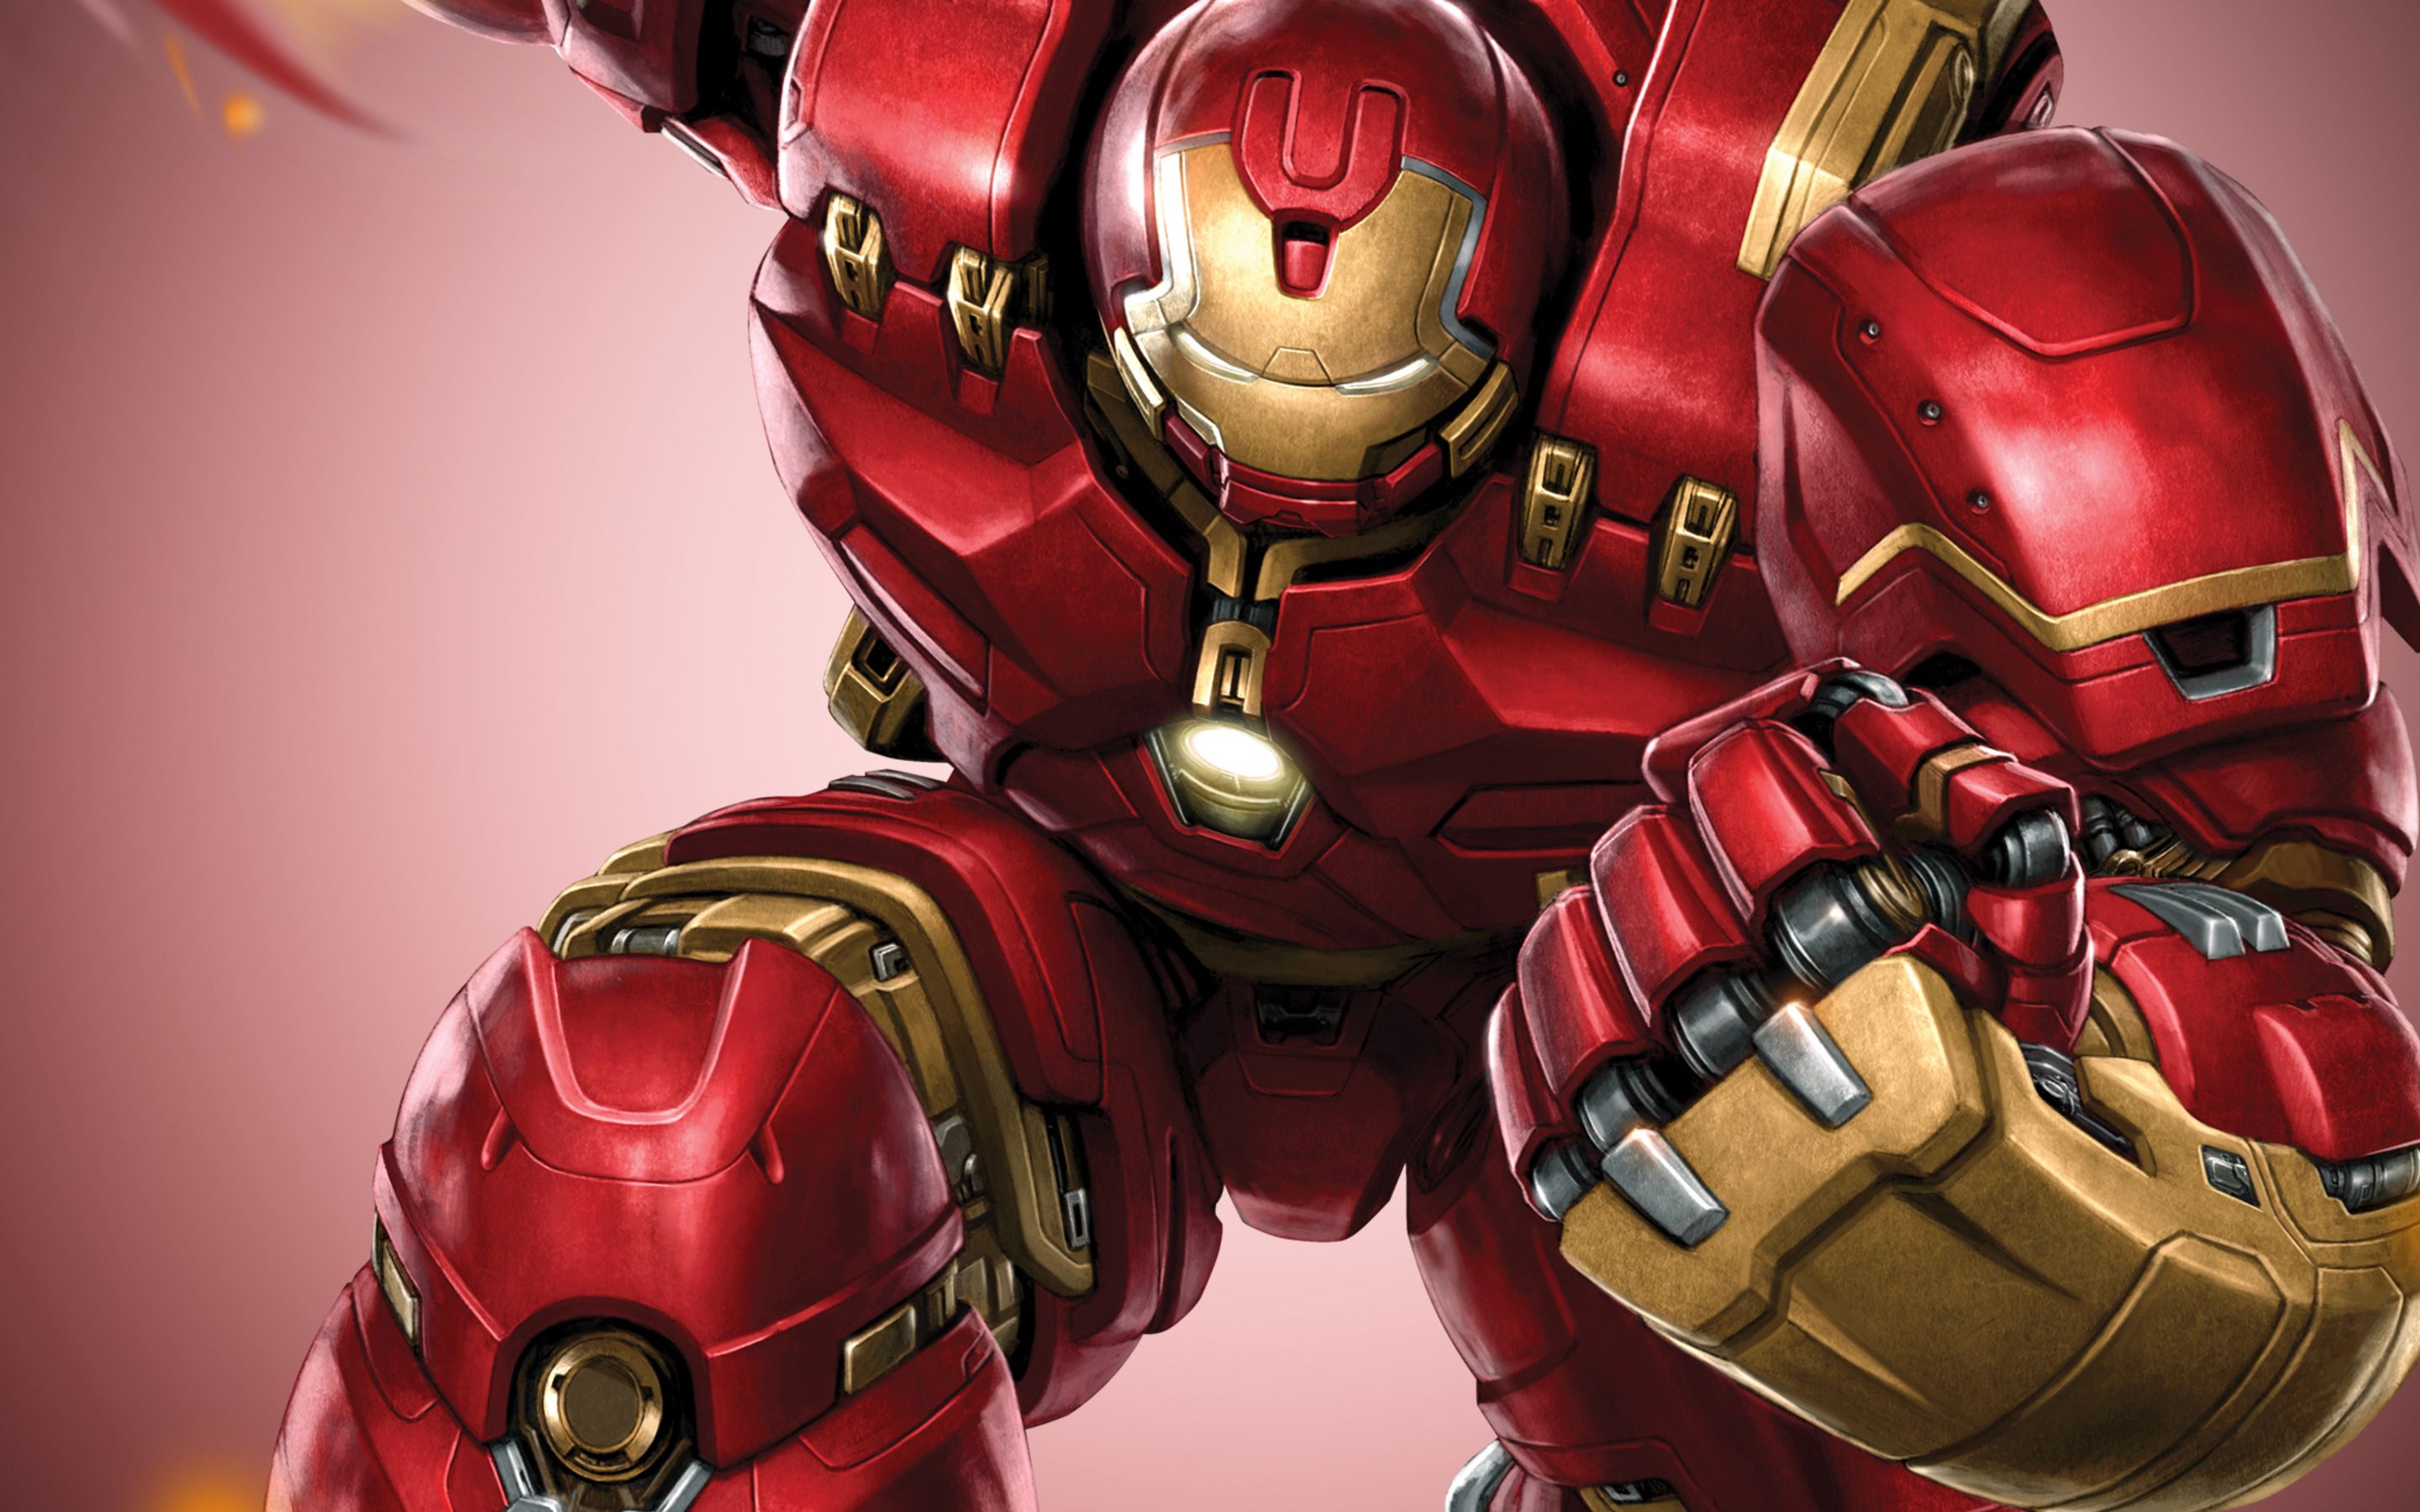 Download Wallpaper Hulkbuster, Superheroes, Close Up, Marvel Comics For Desktop With Resolution 2880x1800. High Quality HD Picture Wallpaper